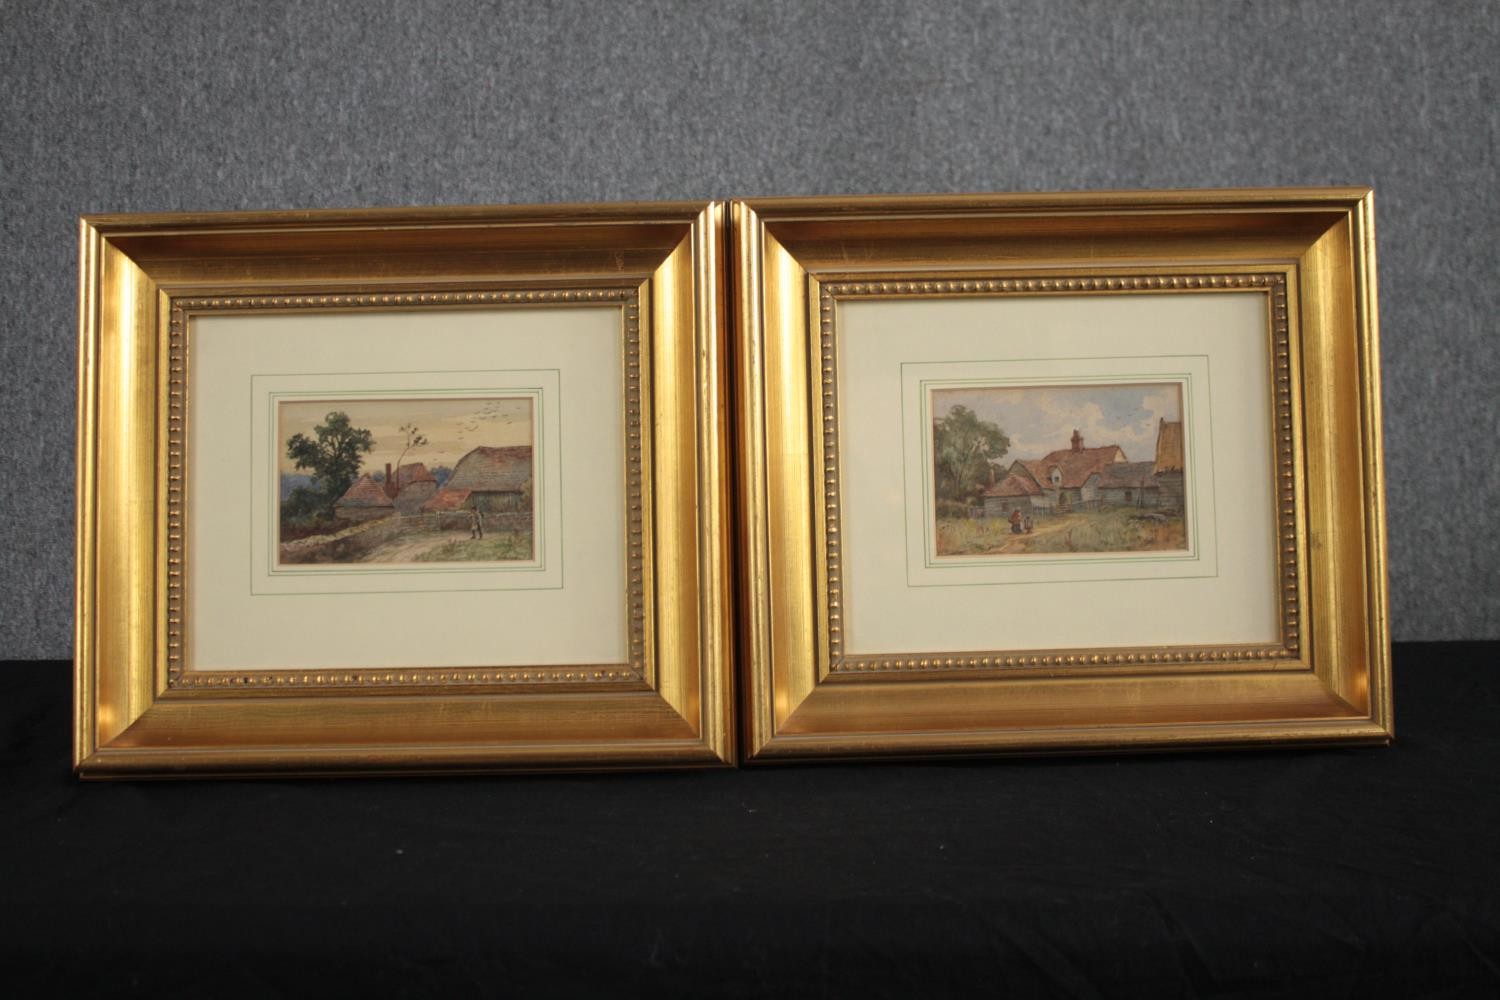 A pair of watercolours. Signed indistinctly but both by the same hand. Framed and glazed. H.33 W.